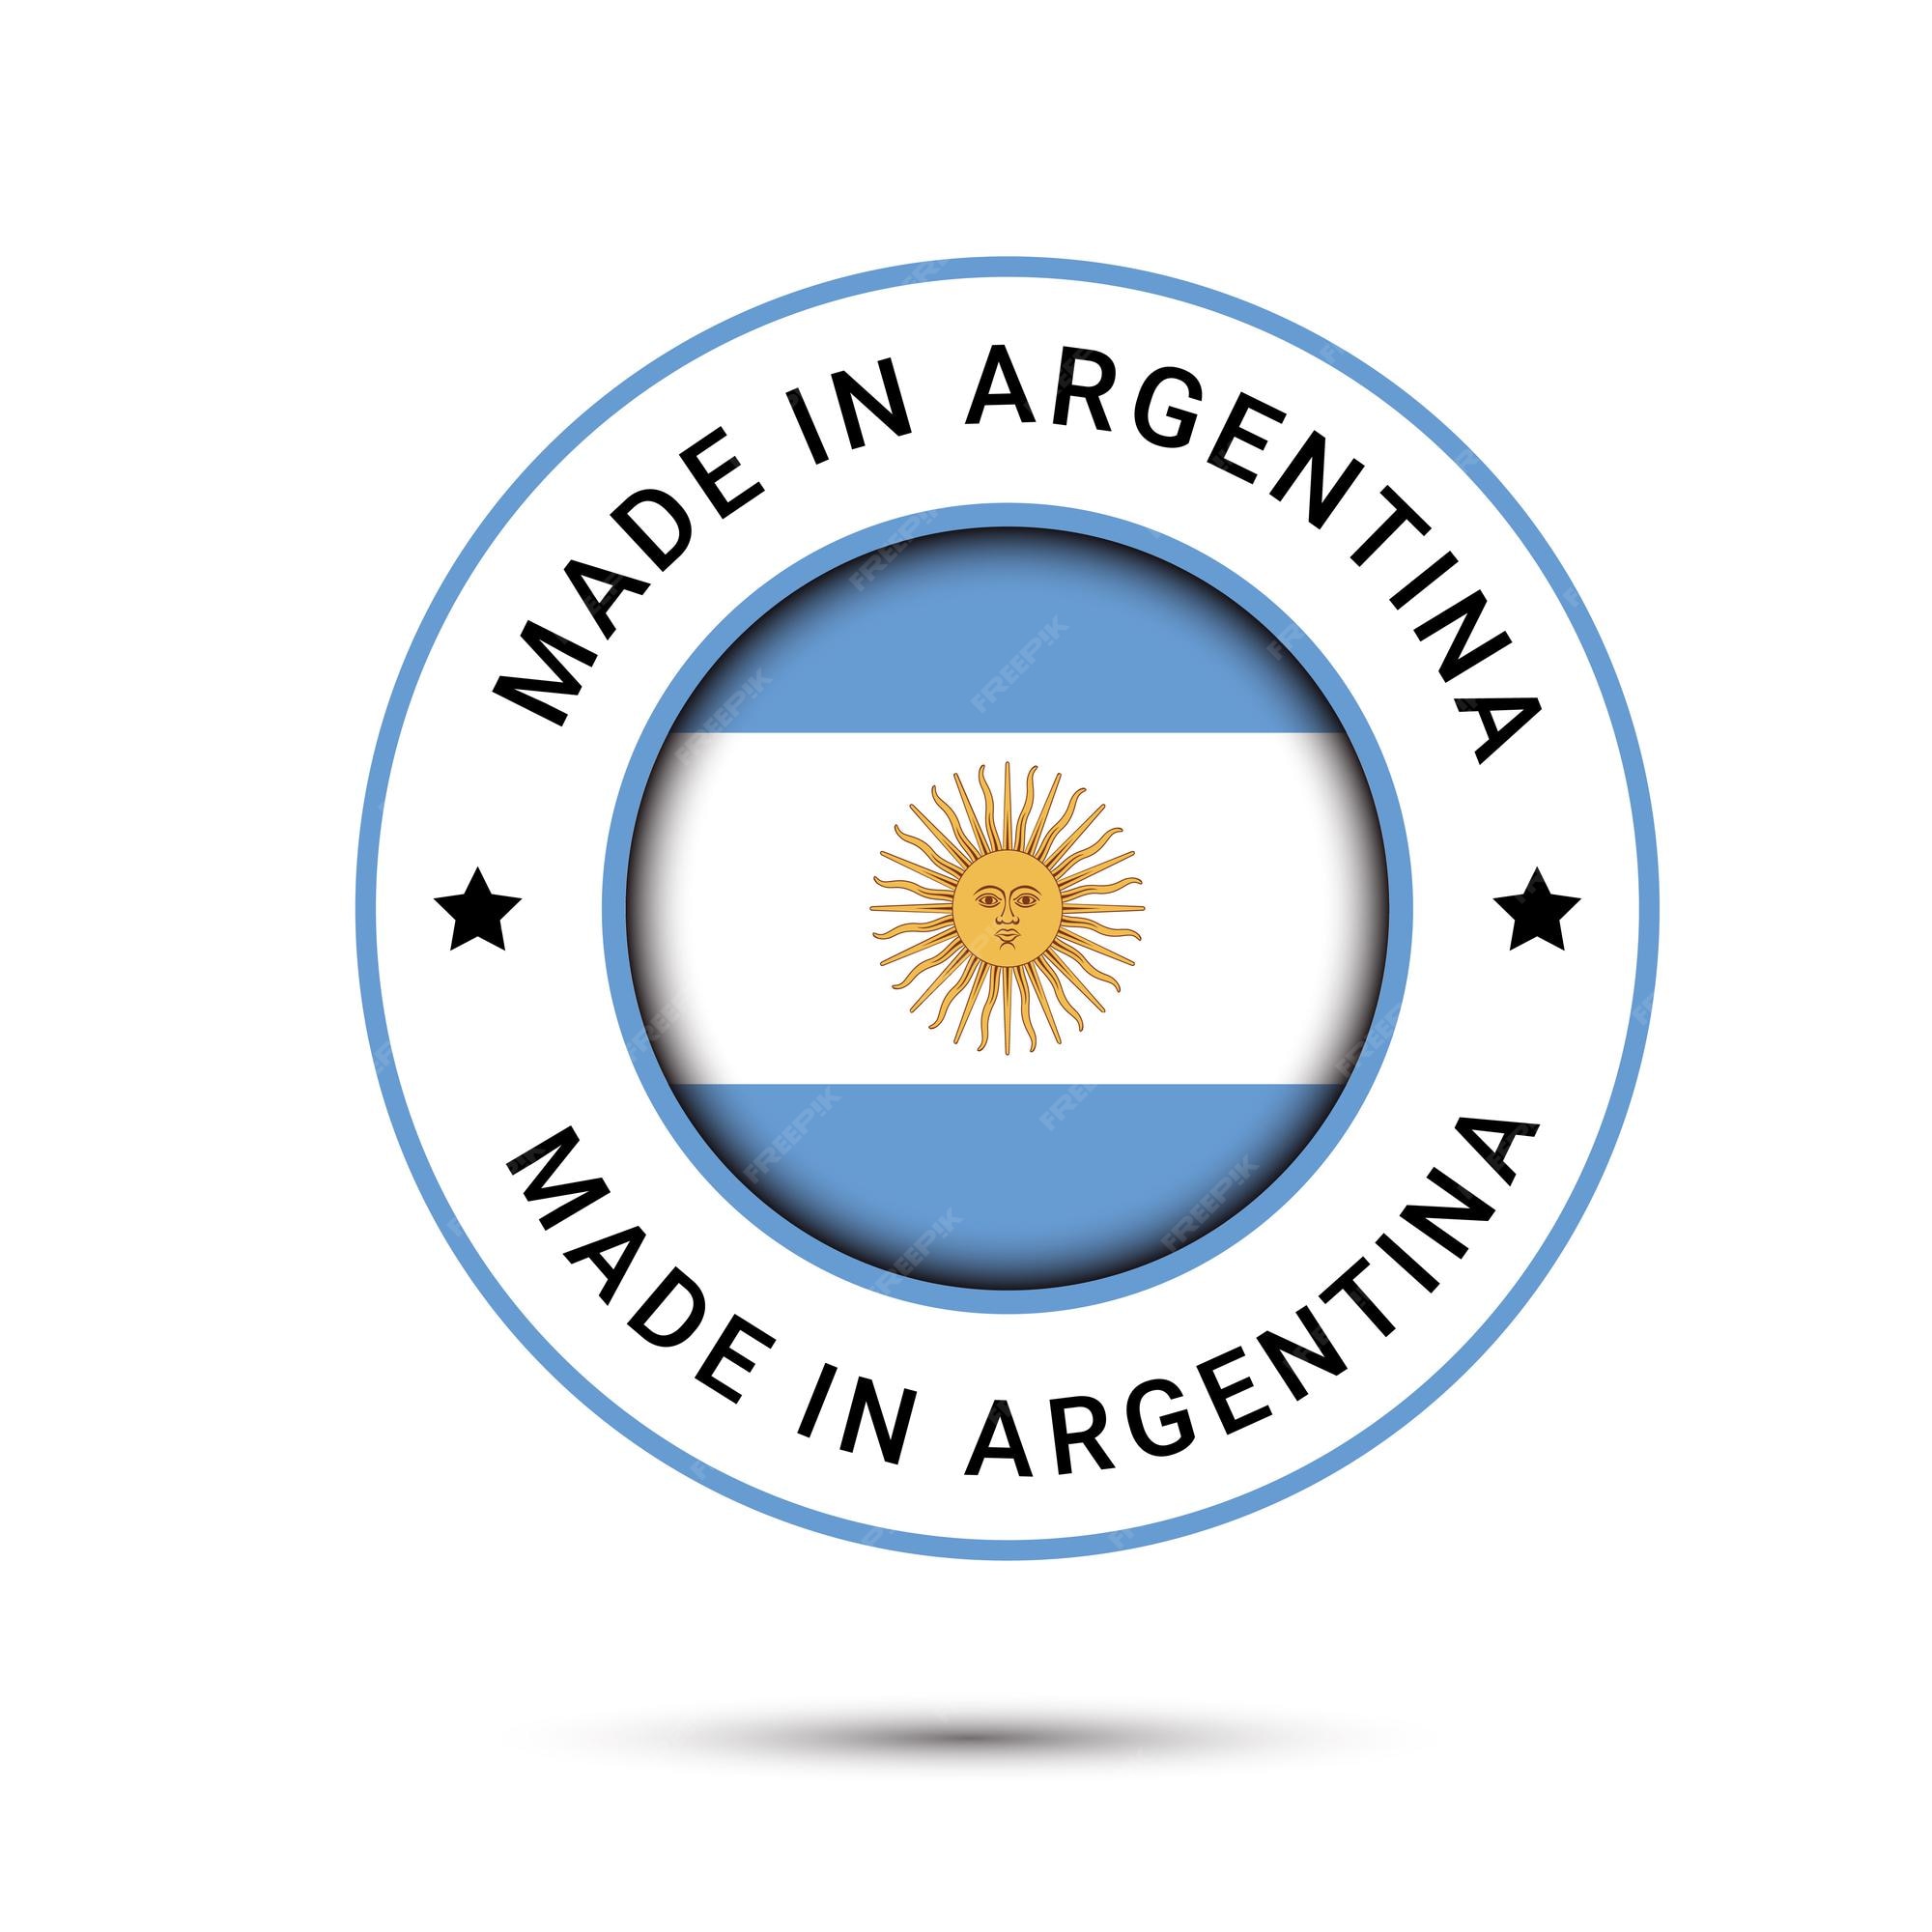 Premium Vector | Made in argentina vector logo and trusts badge icons